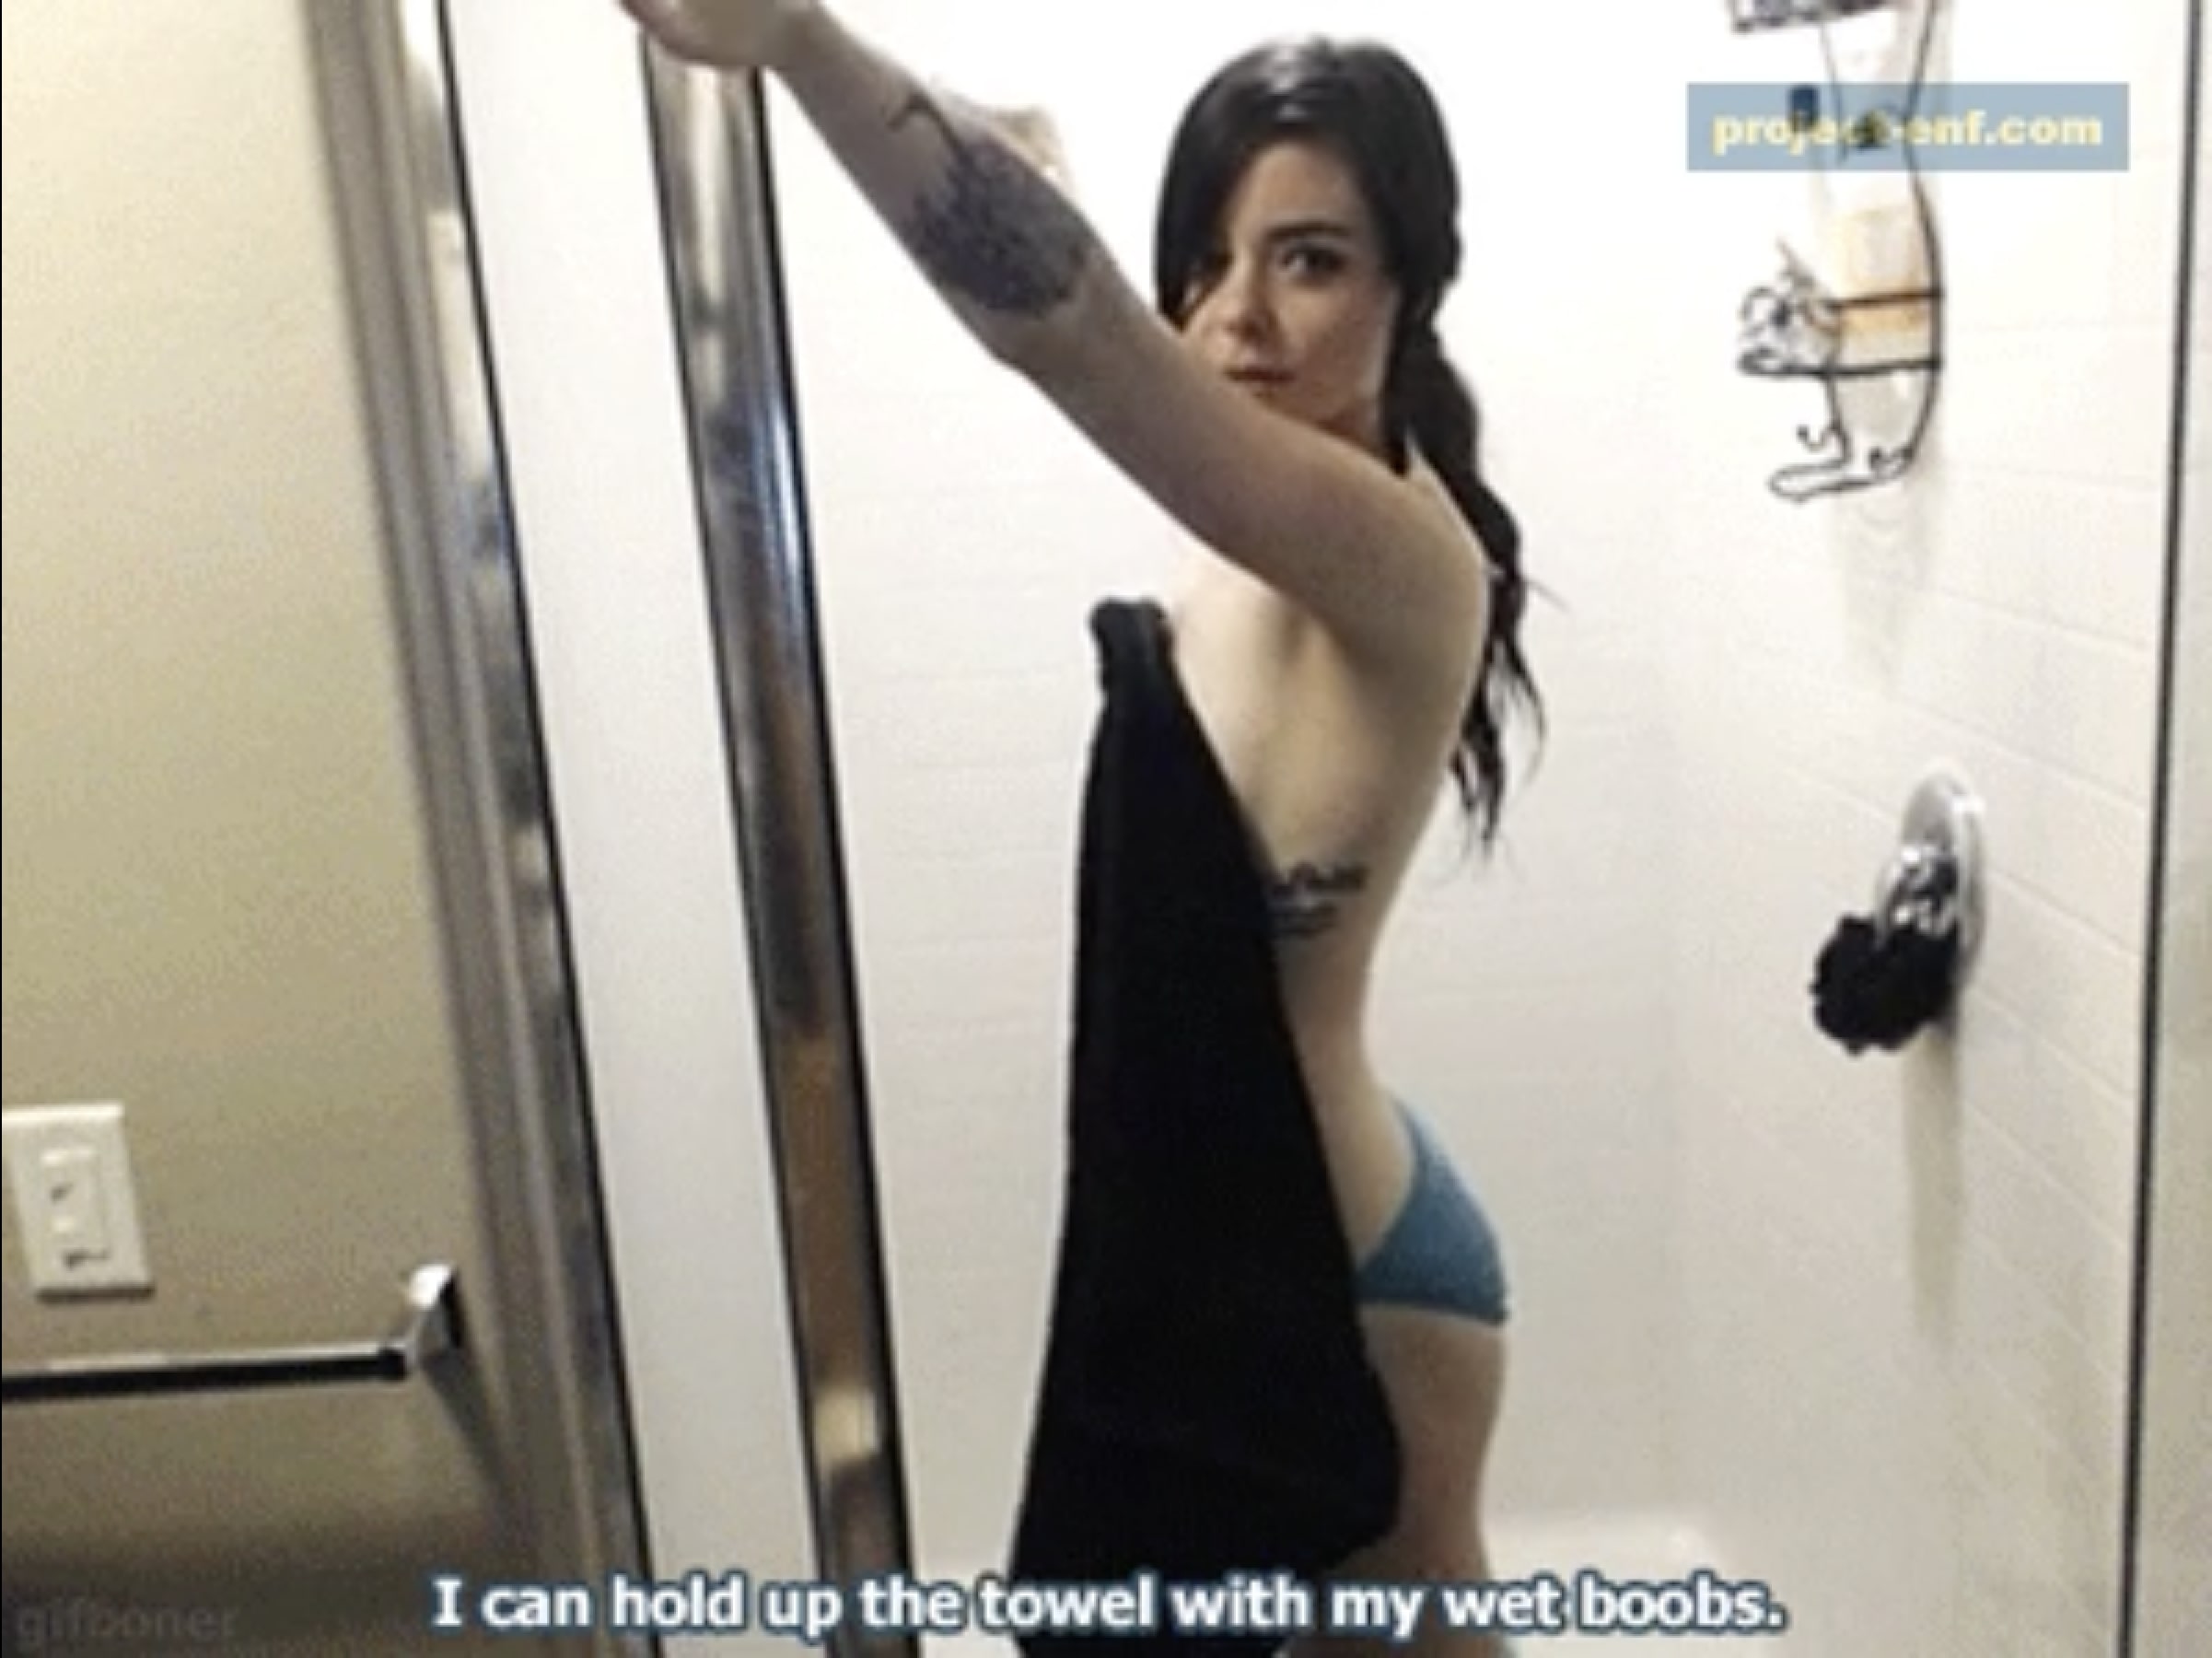 ENF girl tries holding towel up with her boobs